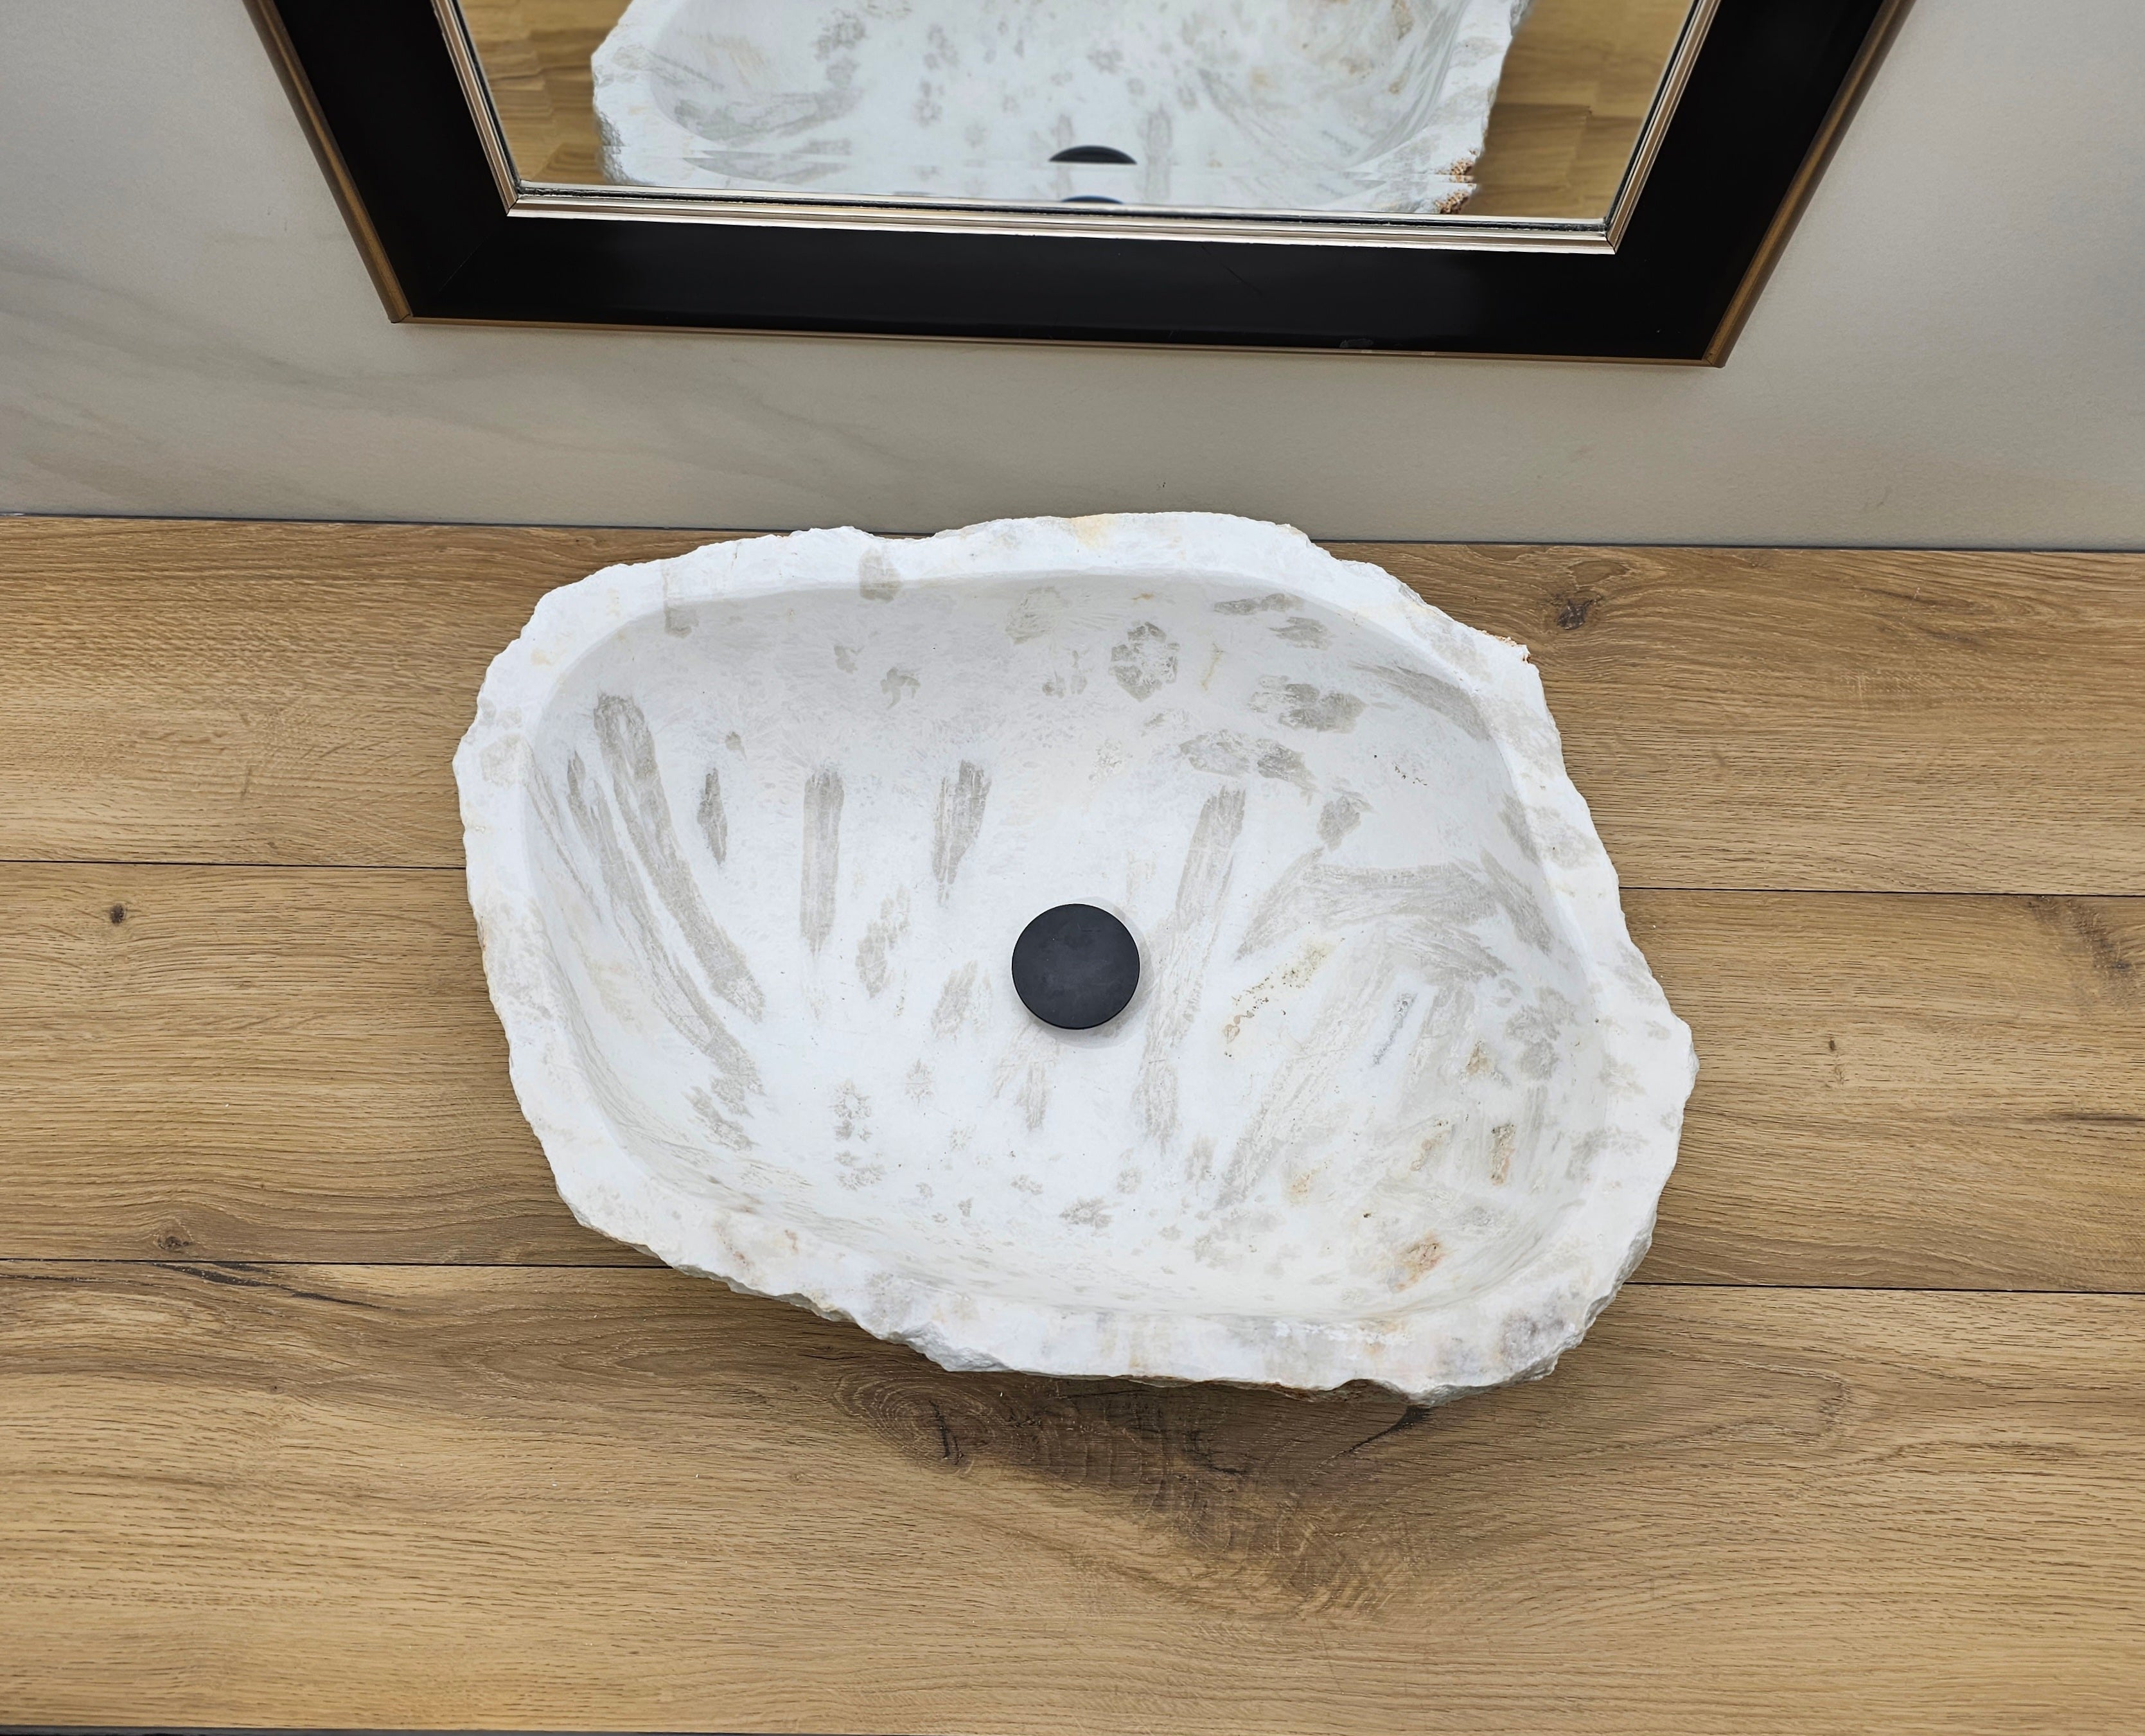 White and Gray Onyx Vessel Bathroom Sink. A beautiful work of art. We offer fast shipping. Handmade in Mexico. We hand finish, package, and ship from the USA. Buy now at www.felipeandgrace.com.